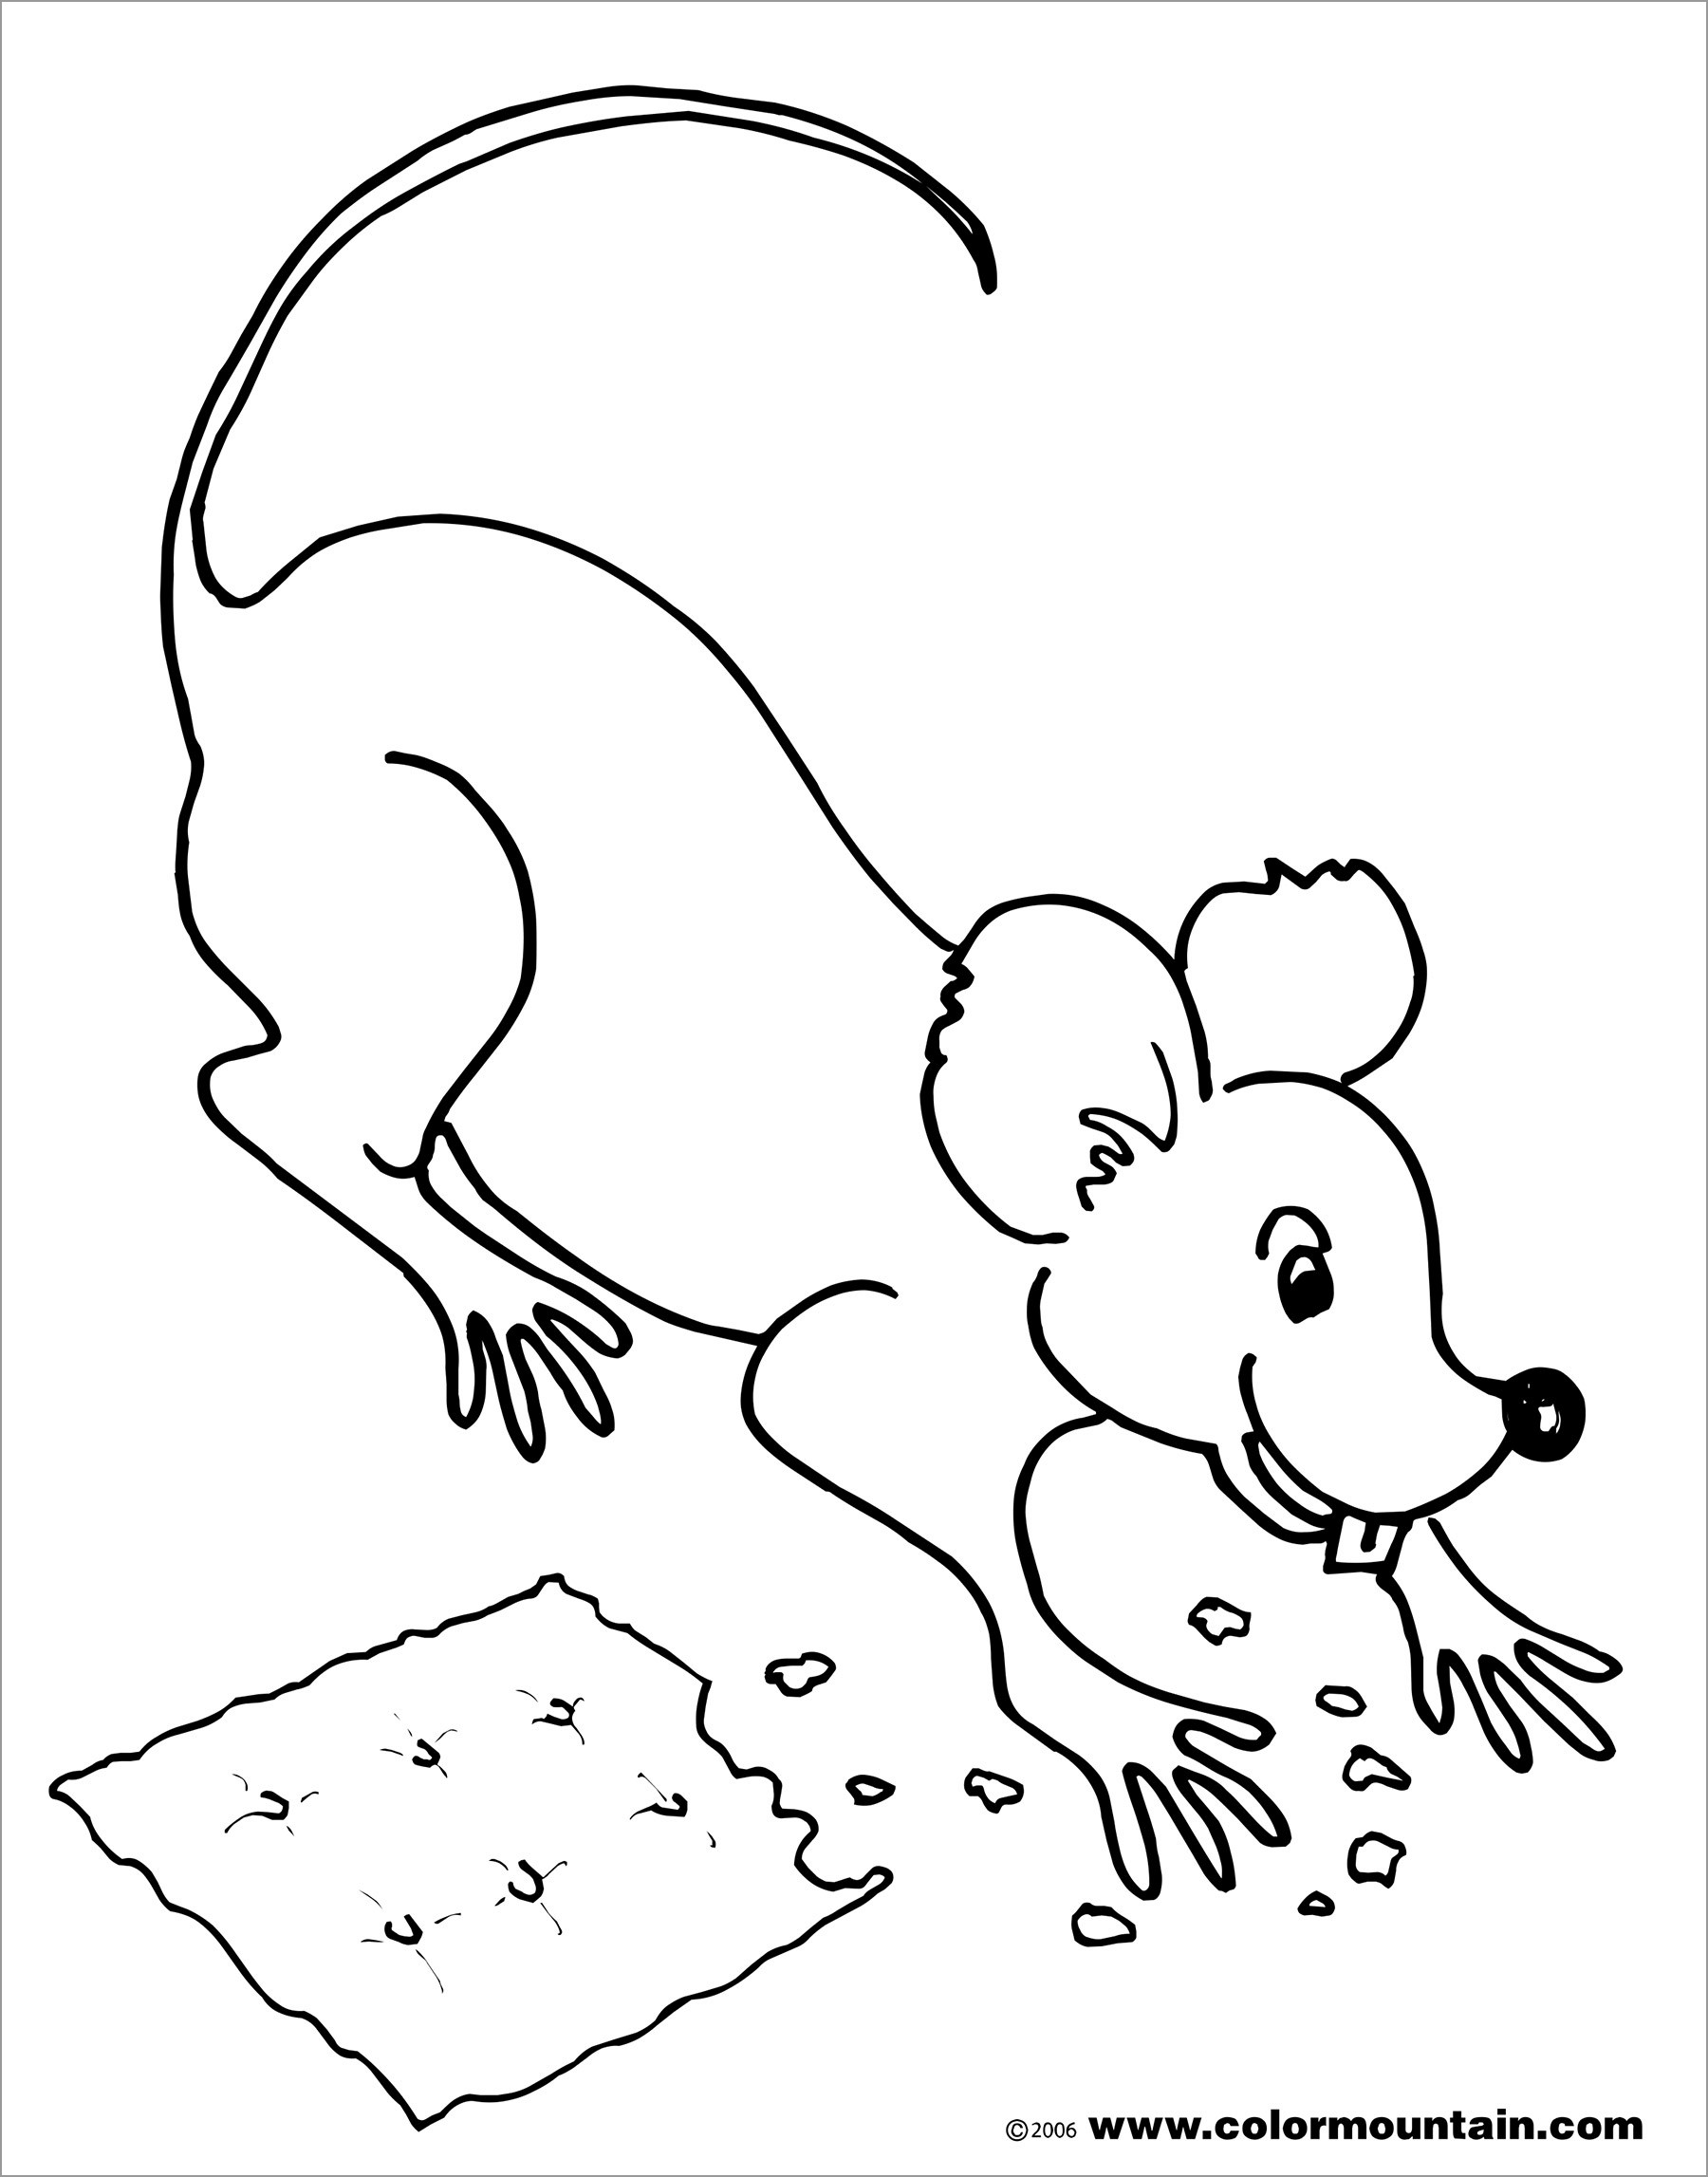 Mouse Eat Cracker Coloring Page